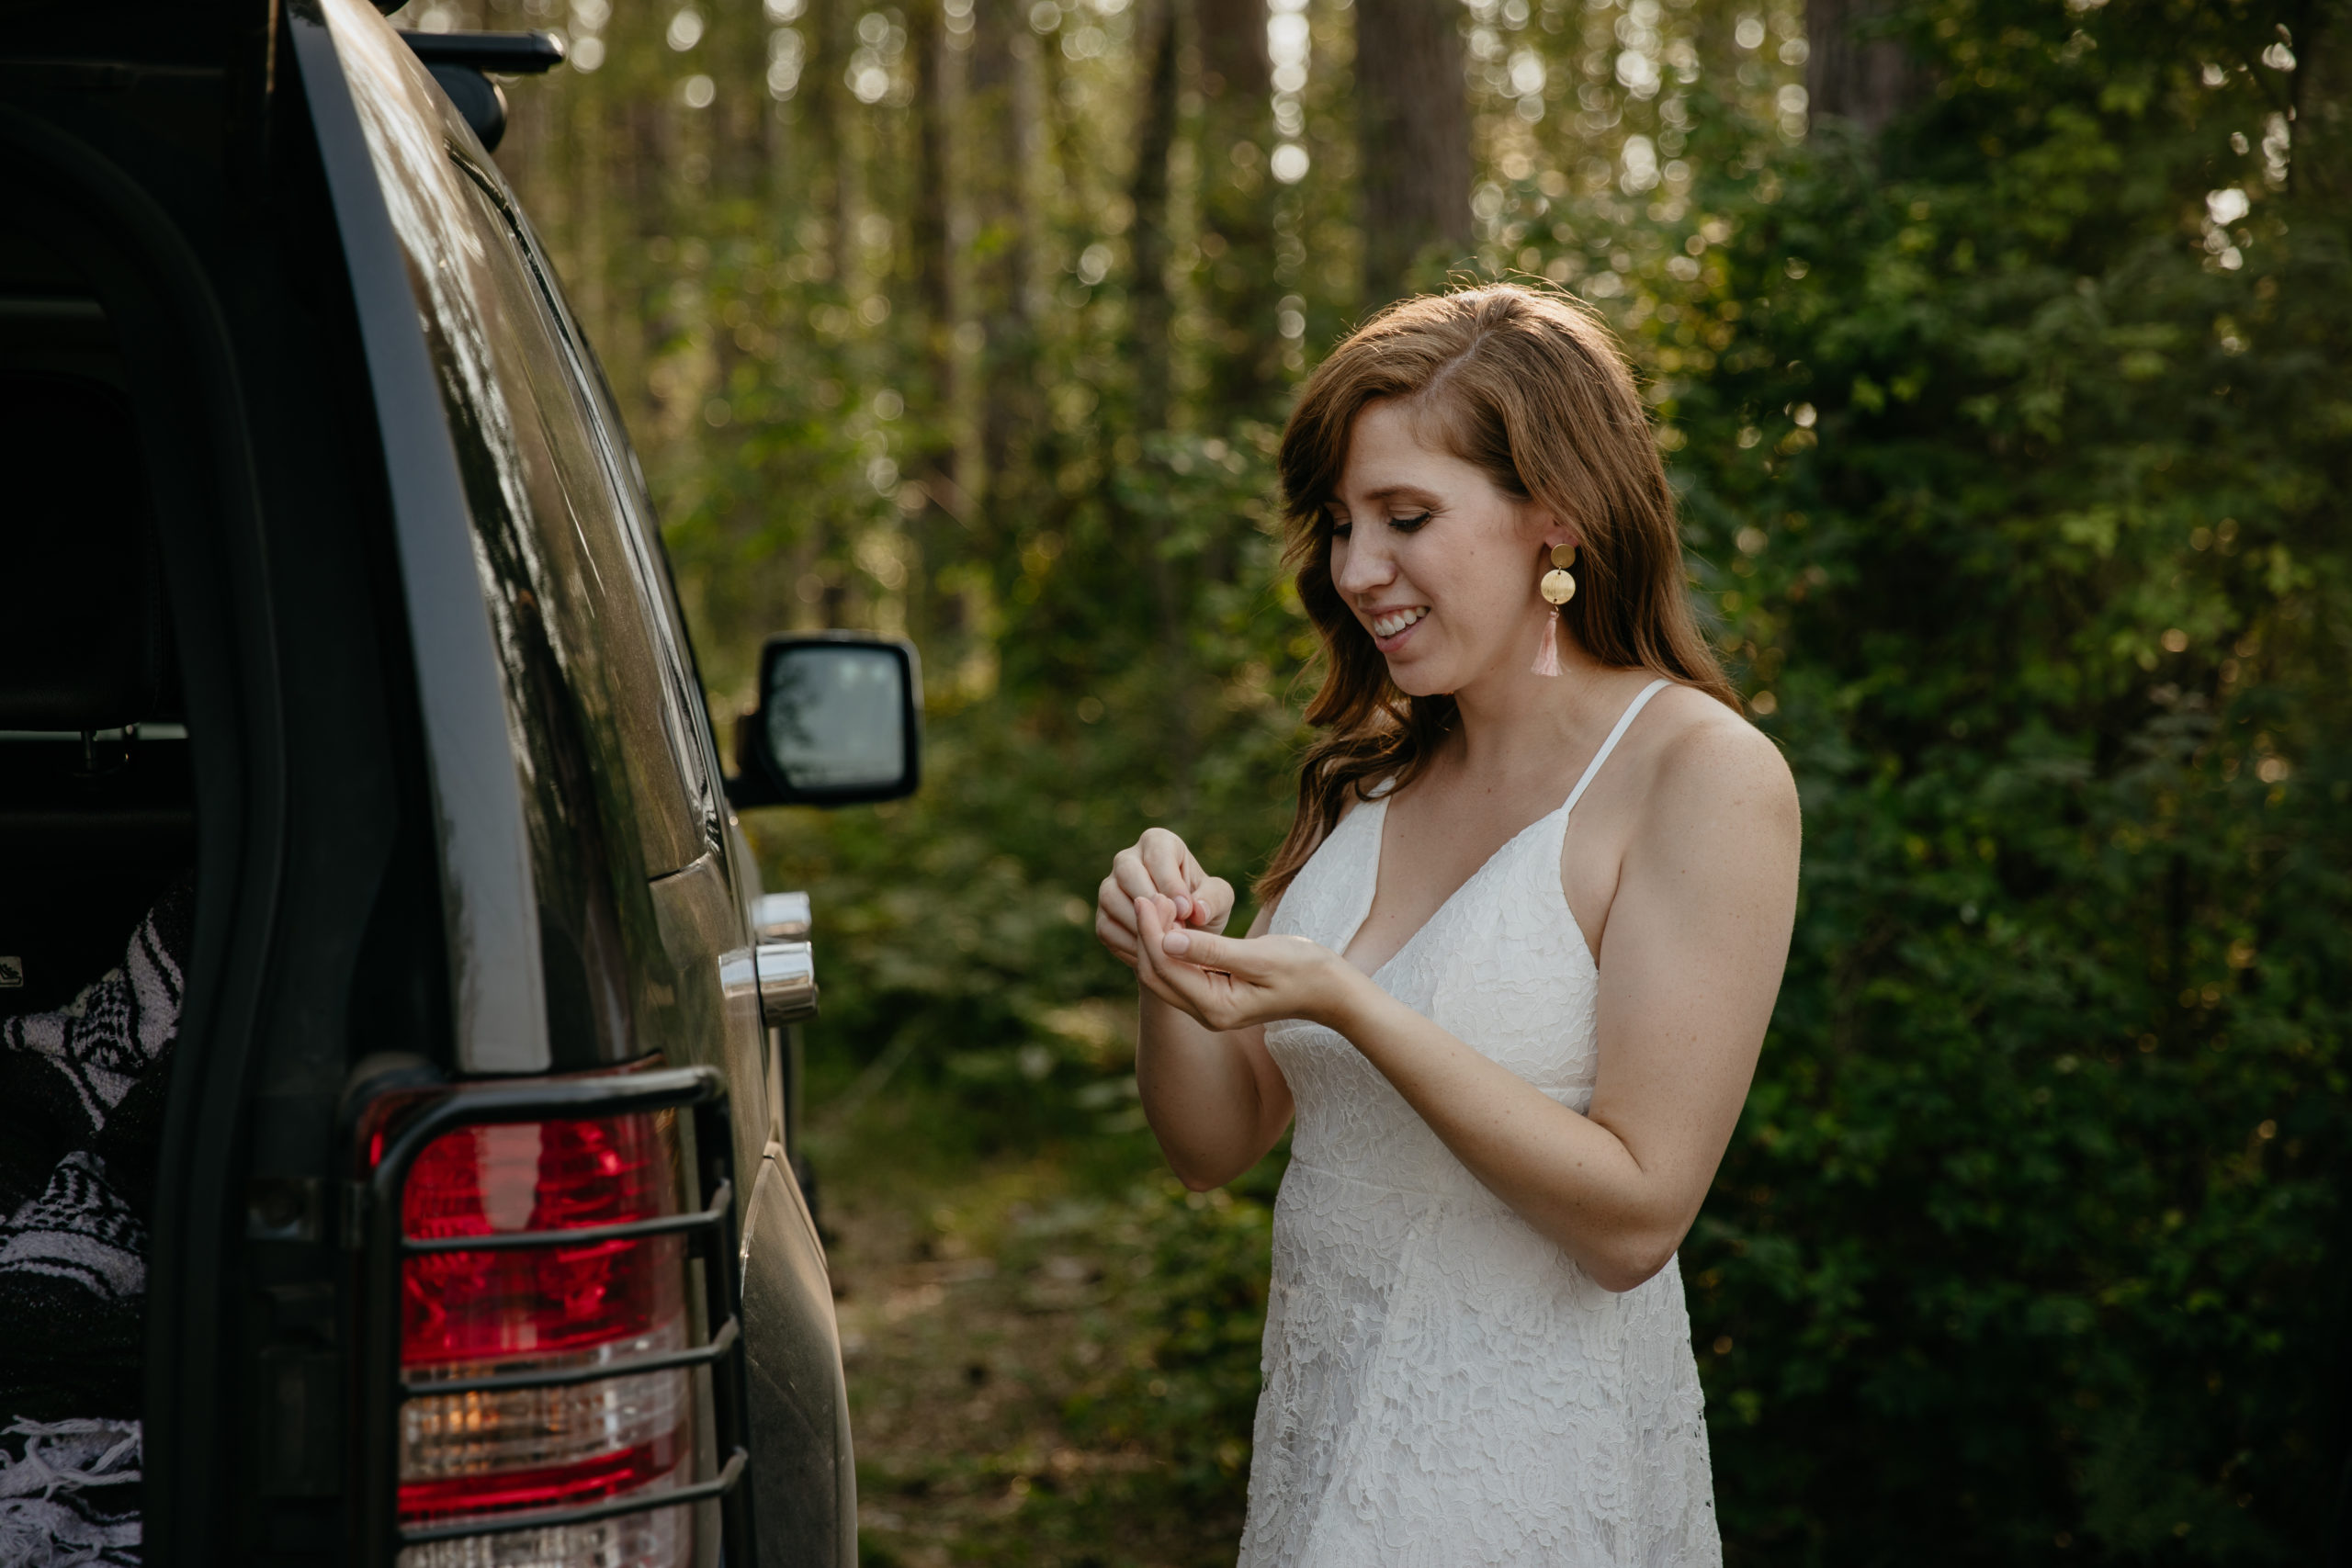 The bride putting on earrings before their forest elopement in Michigan